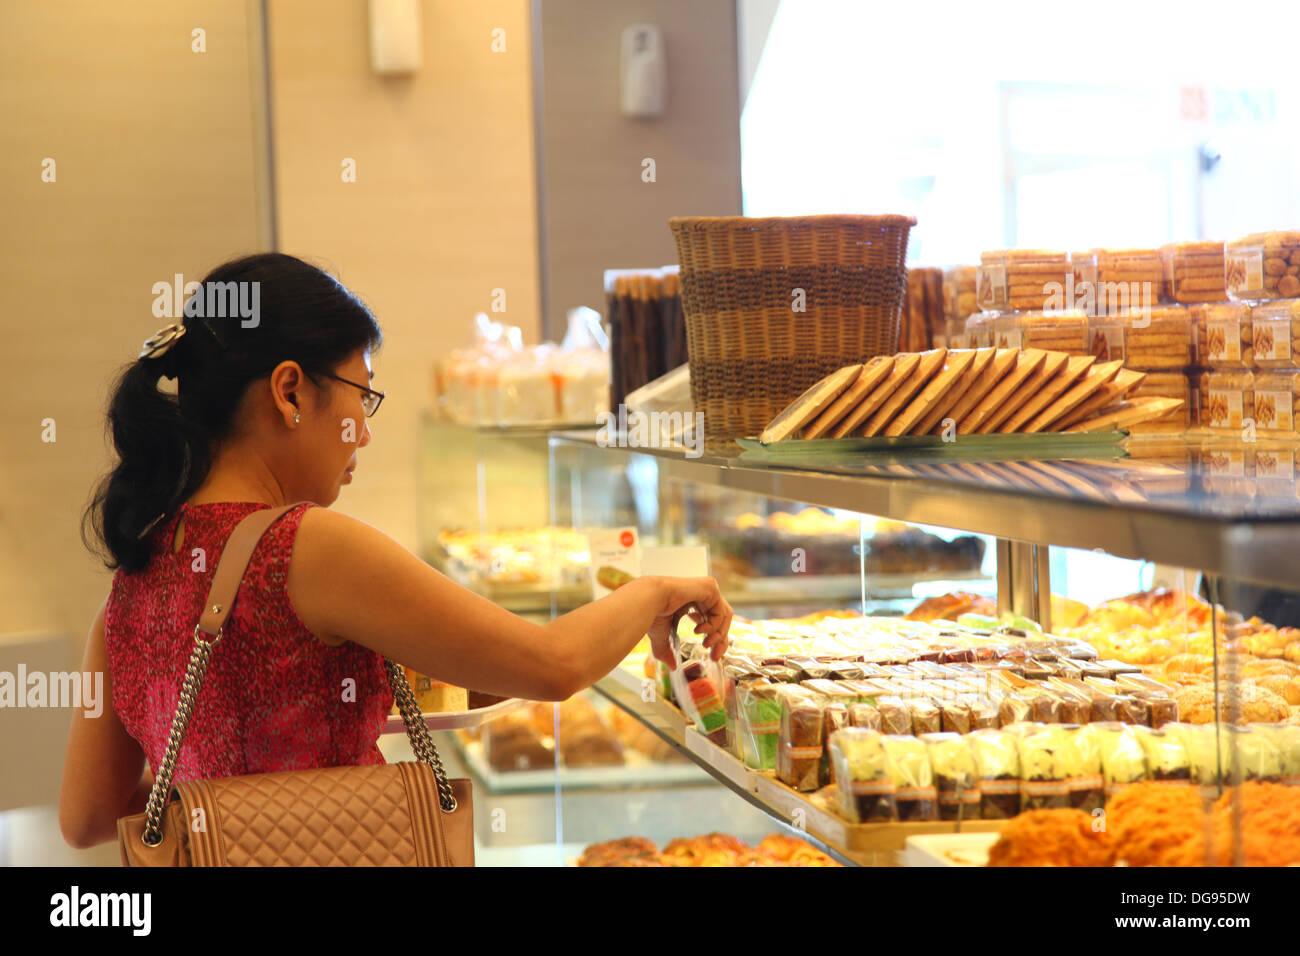 Cilandak Town Square, Jakarta, Indonesia - October 12, 2013: A woman picks bread and pastry at BreadTalk Bakery in Cilandak Town Stock Photo